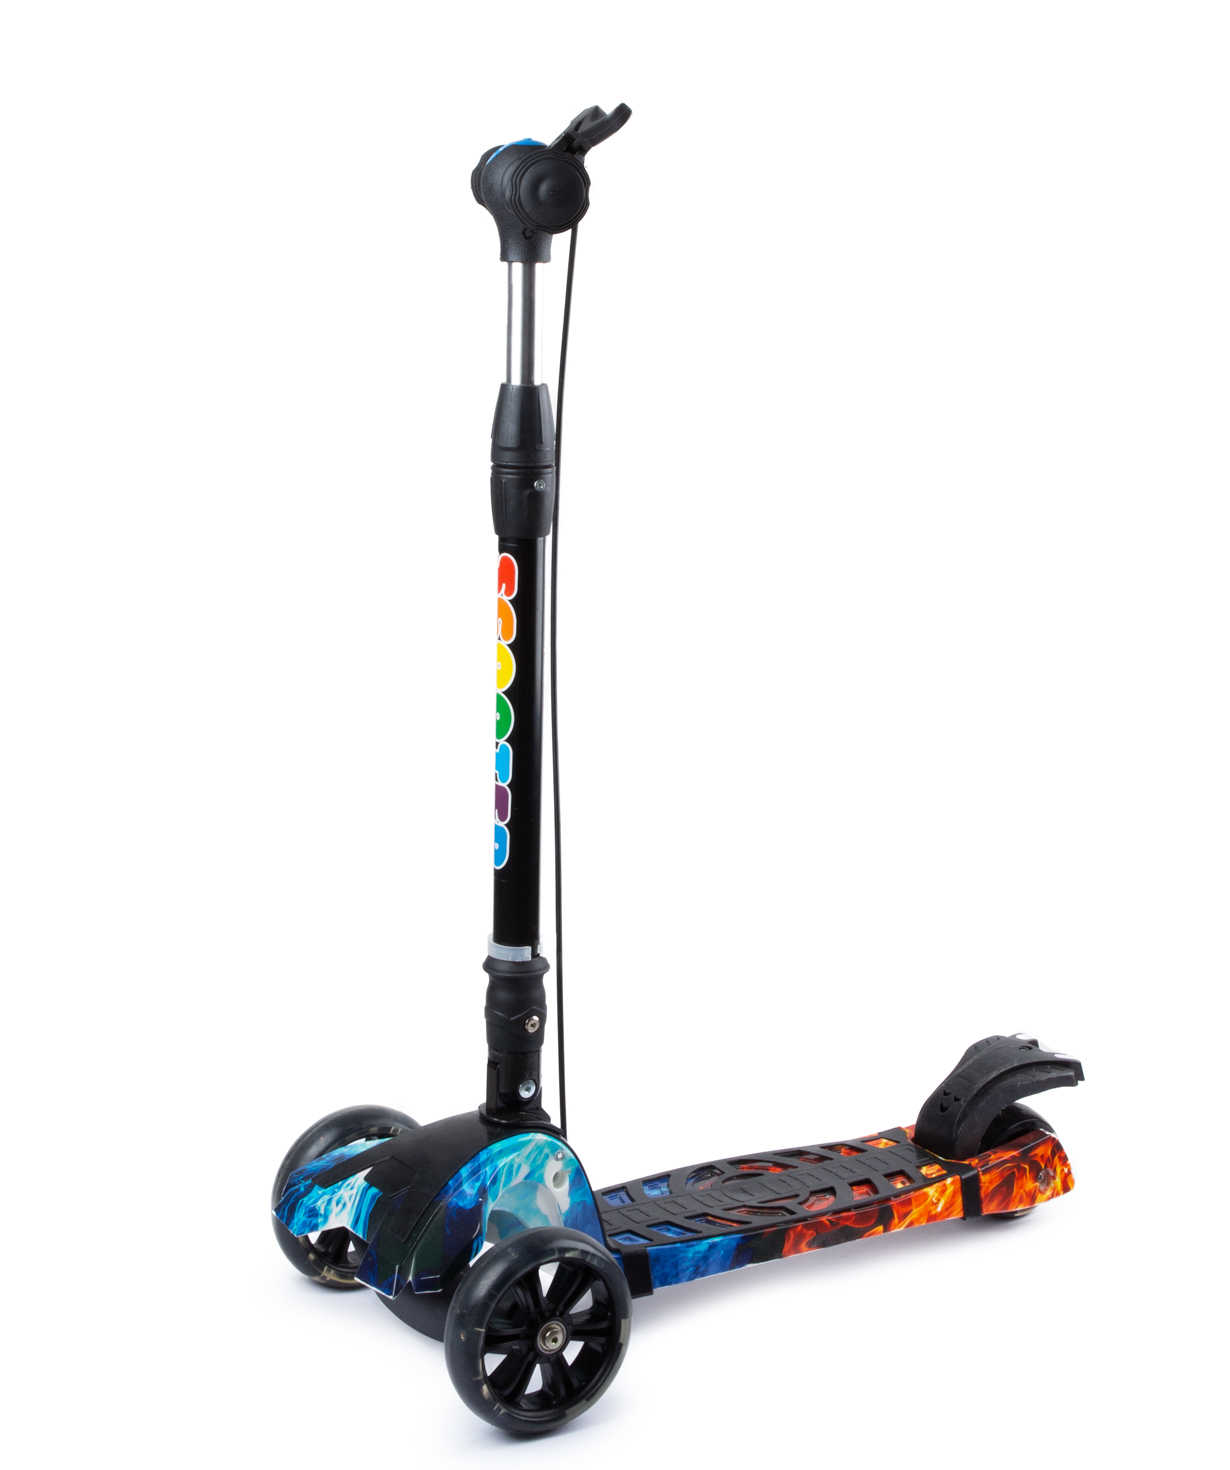 Scooter PE-15087 with light effect and handbrake